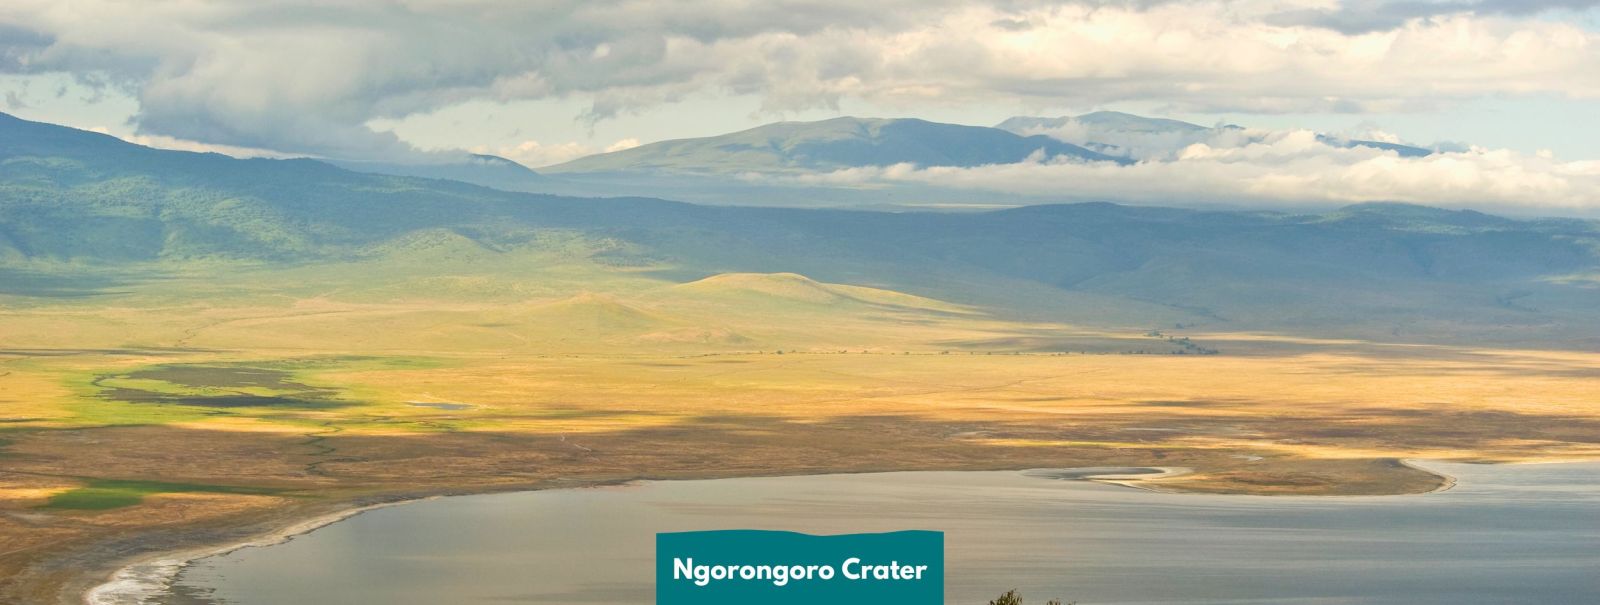 Best time to visit the Ngorongoro Crater